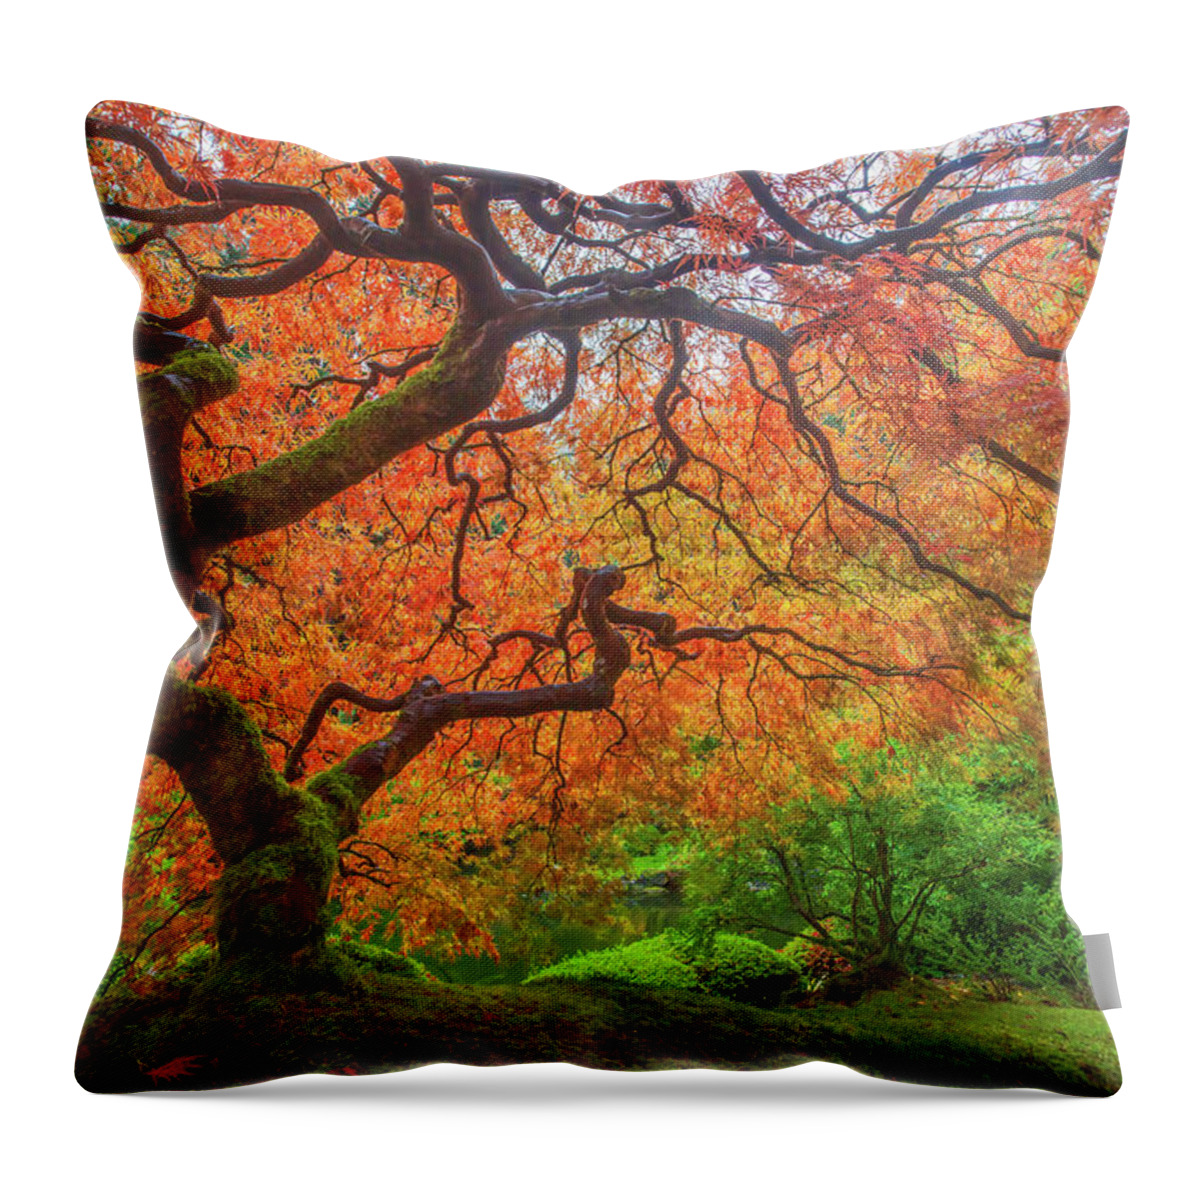 Red Ninja Throw Pillow featuring the photograph Red Ninja by Darren White